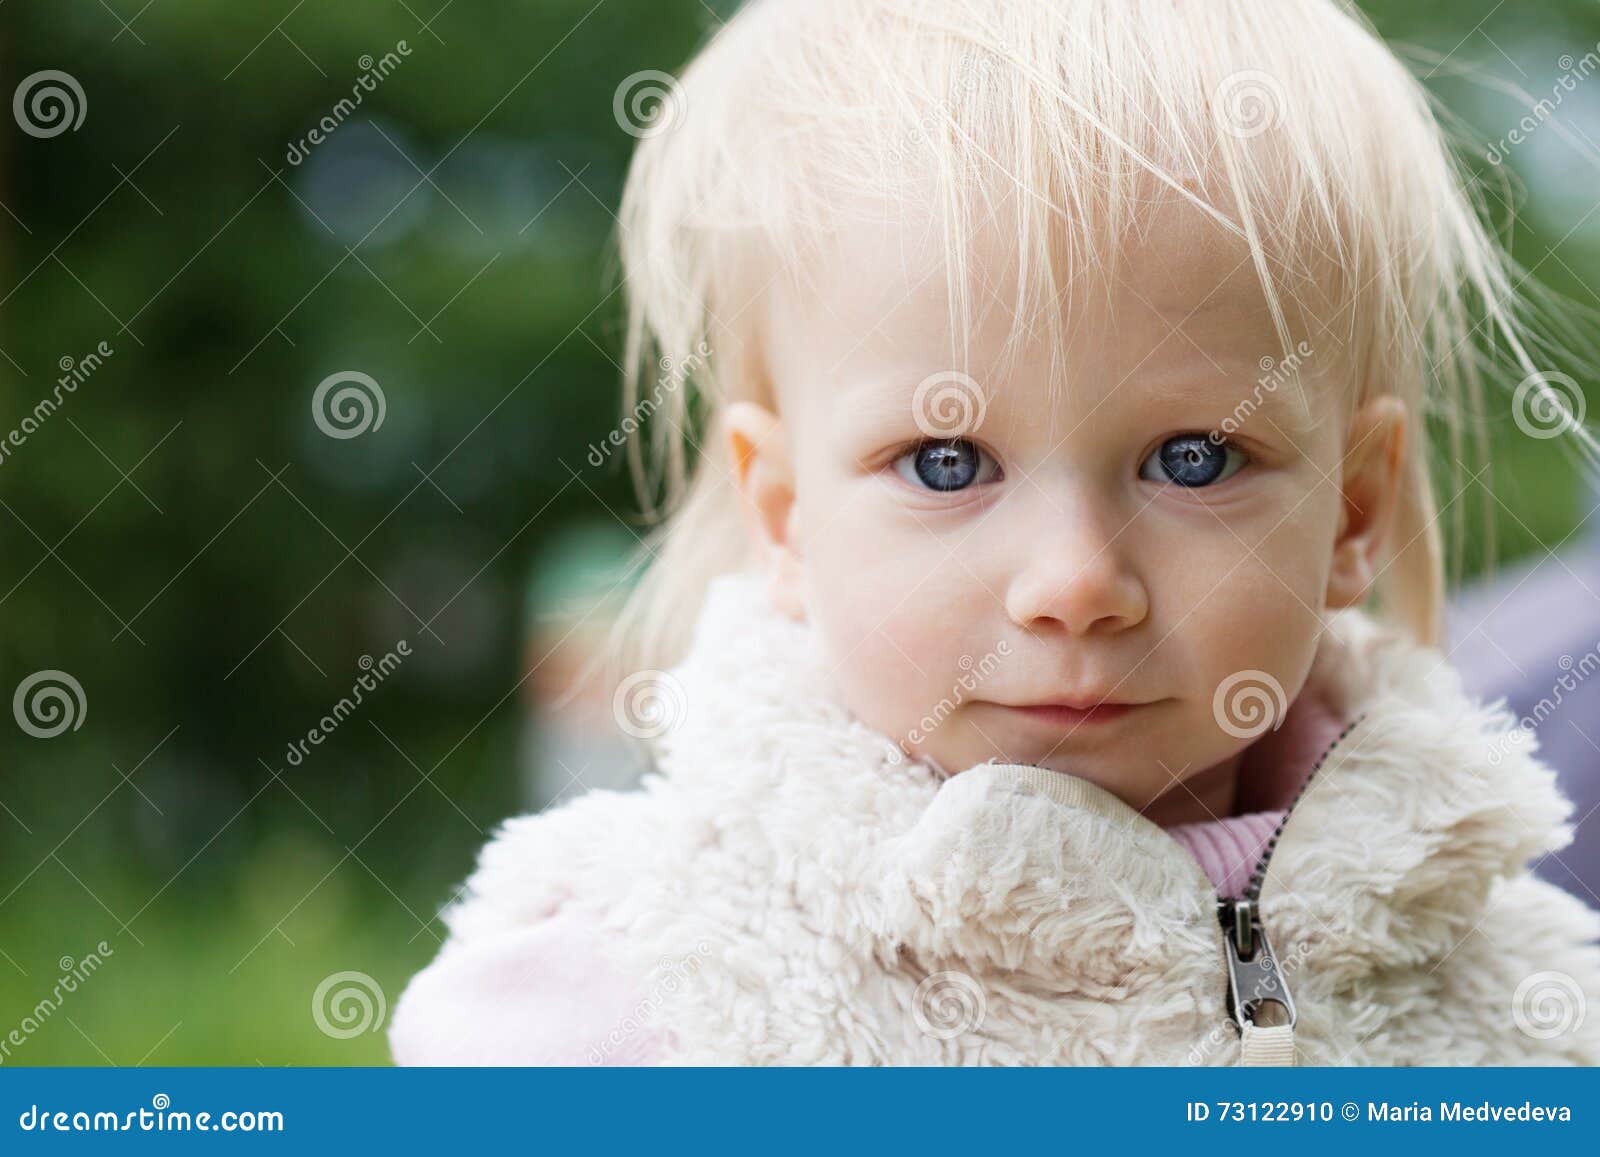 Cute Baby Girl With Blonde Curly Hair Outdoors Stock Photo Image